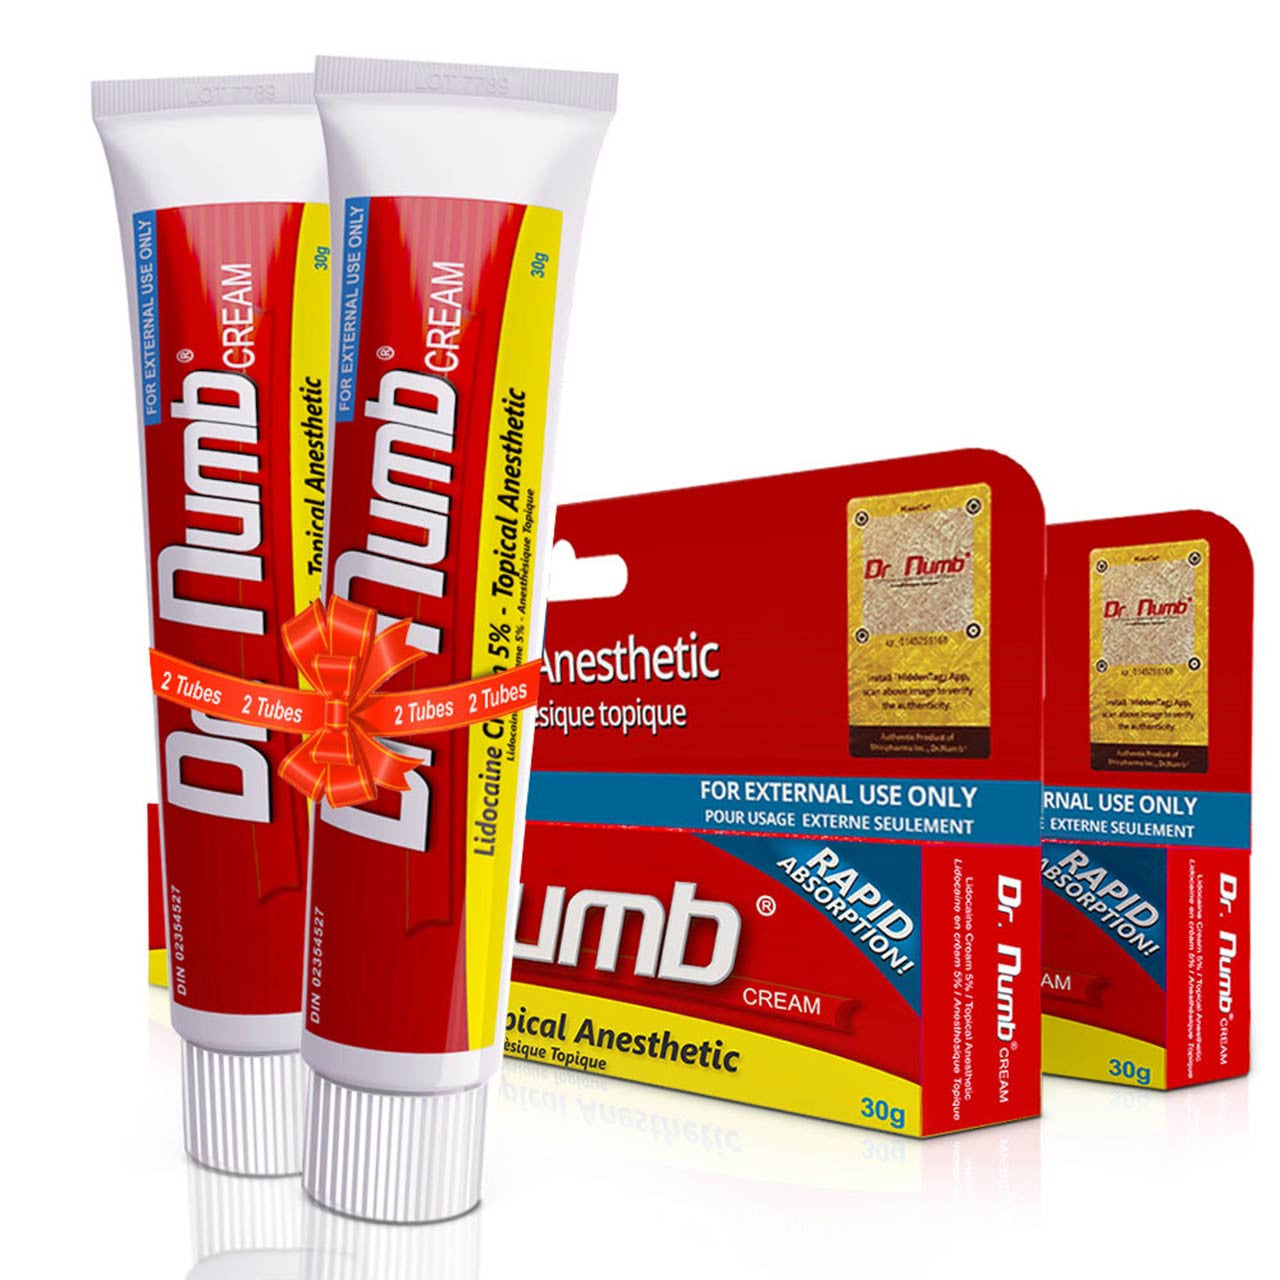 Dr. Numb® 5% Cream (30g) - Effective Pain Relief